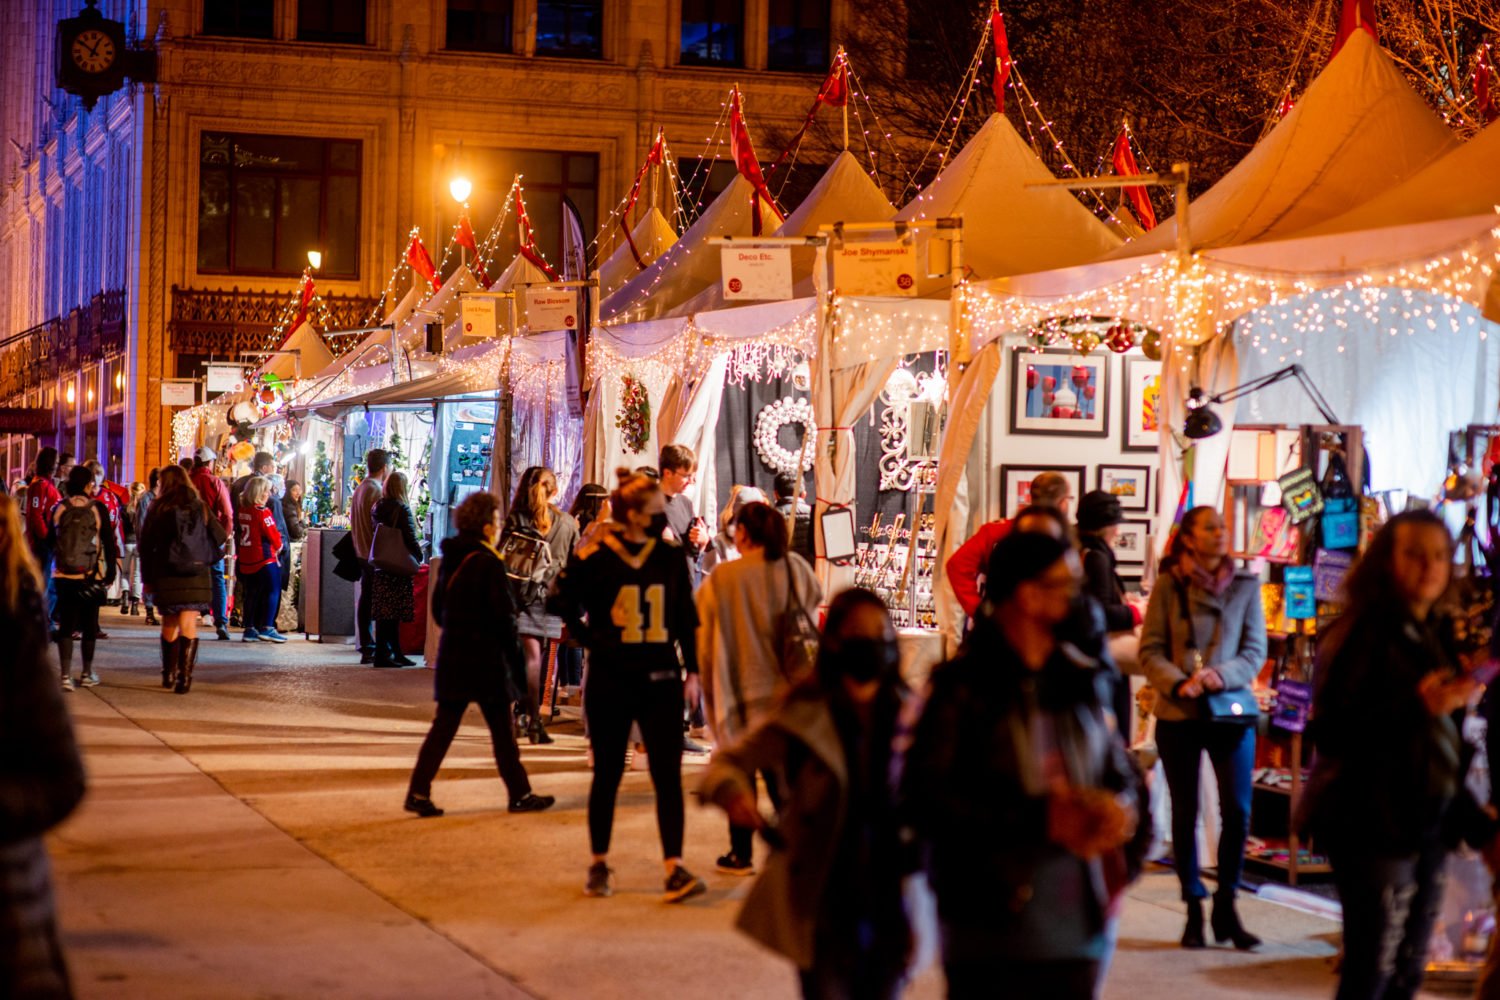 Photograph courtesy of Downtown Holiday Market.